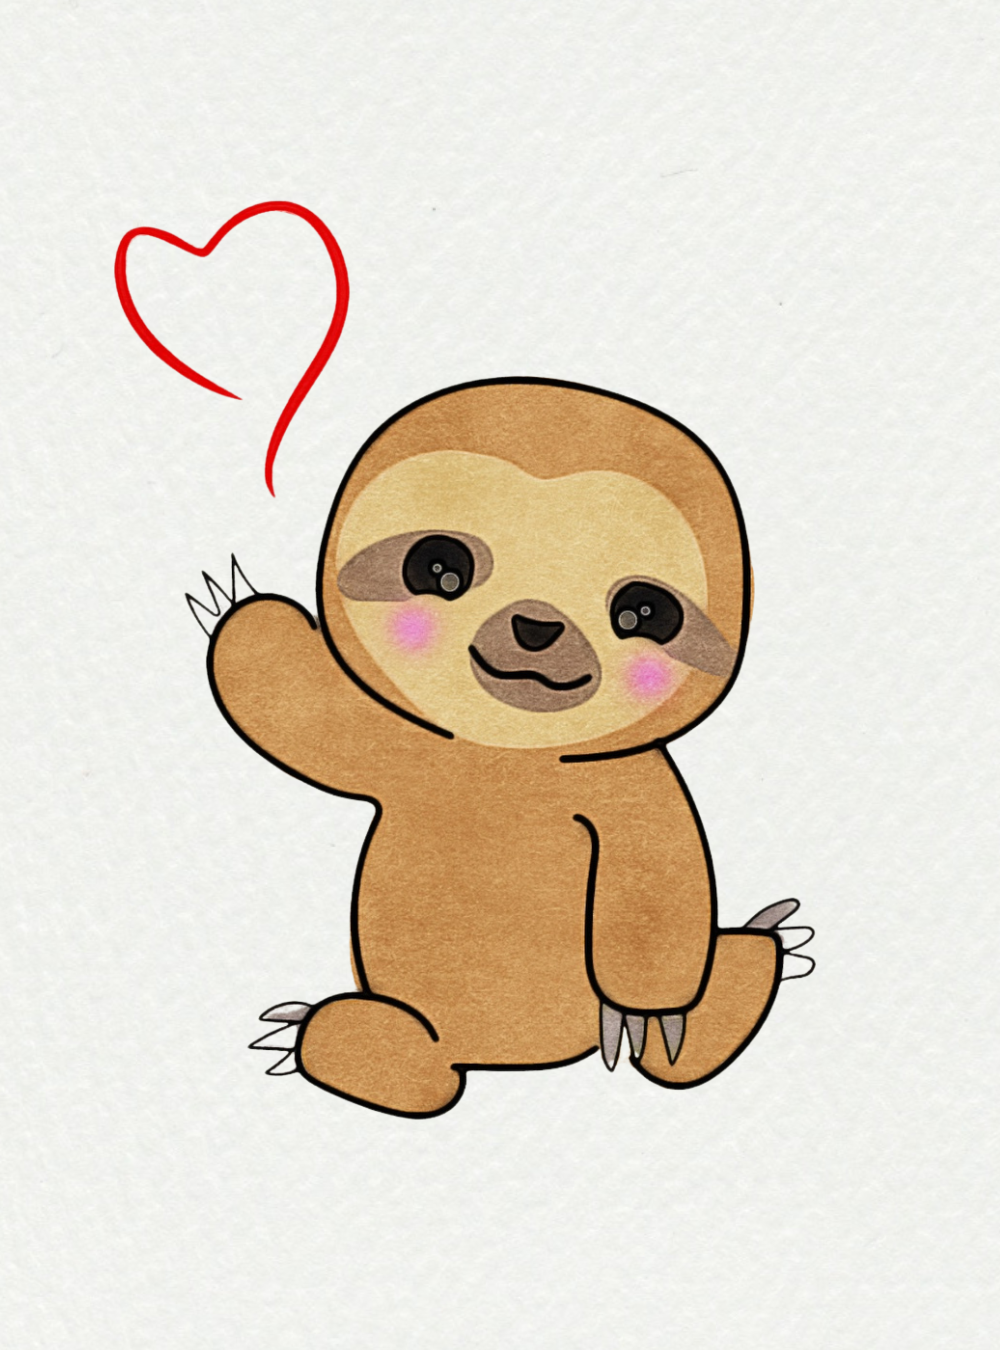 Easy Drawings: Cute Sloth With Rosy Cheeks